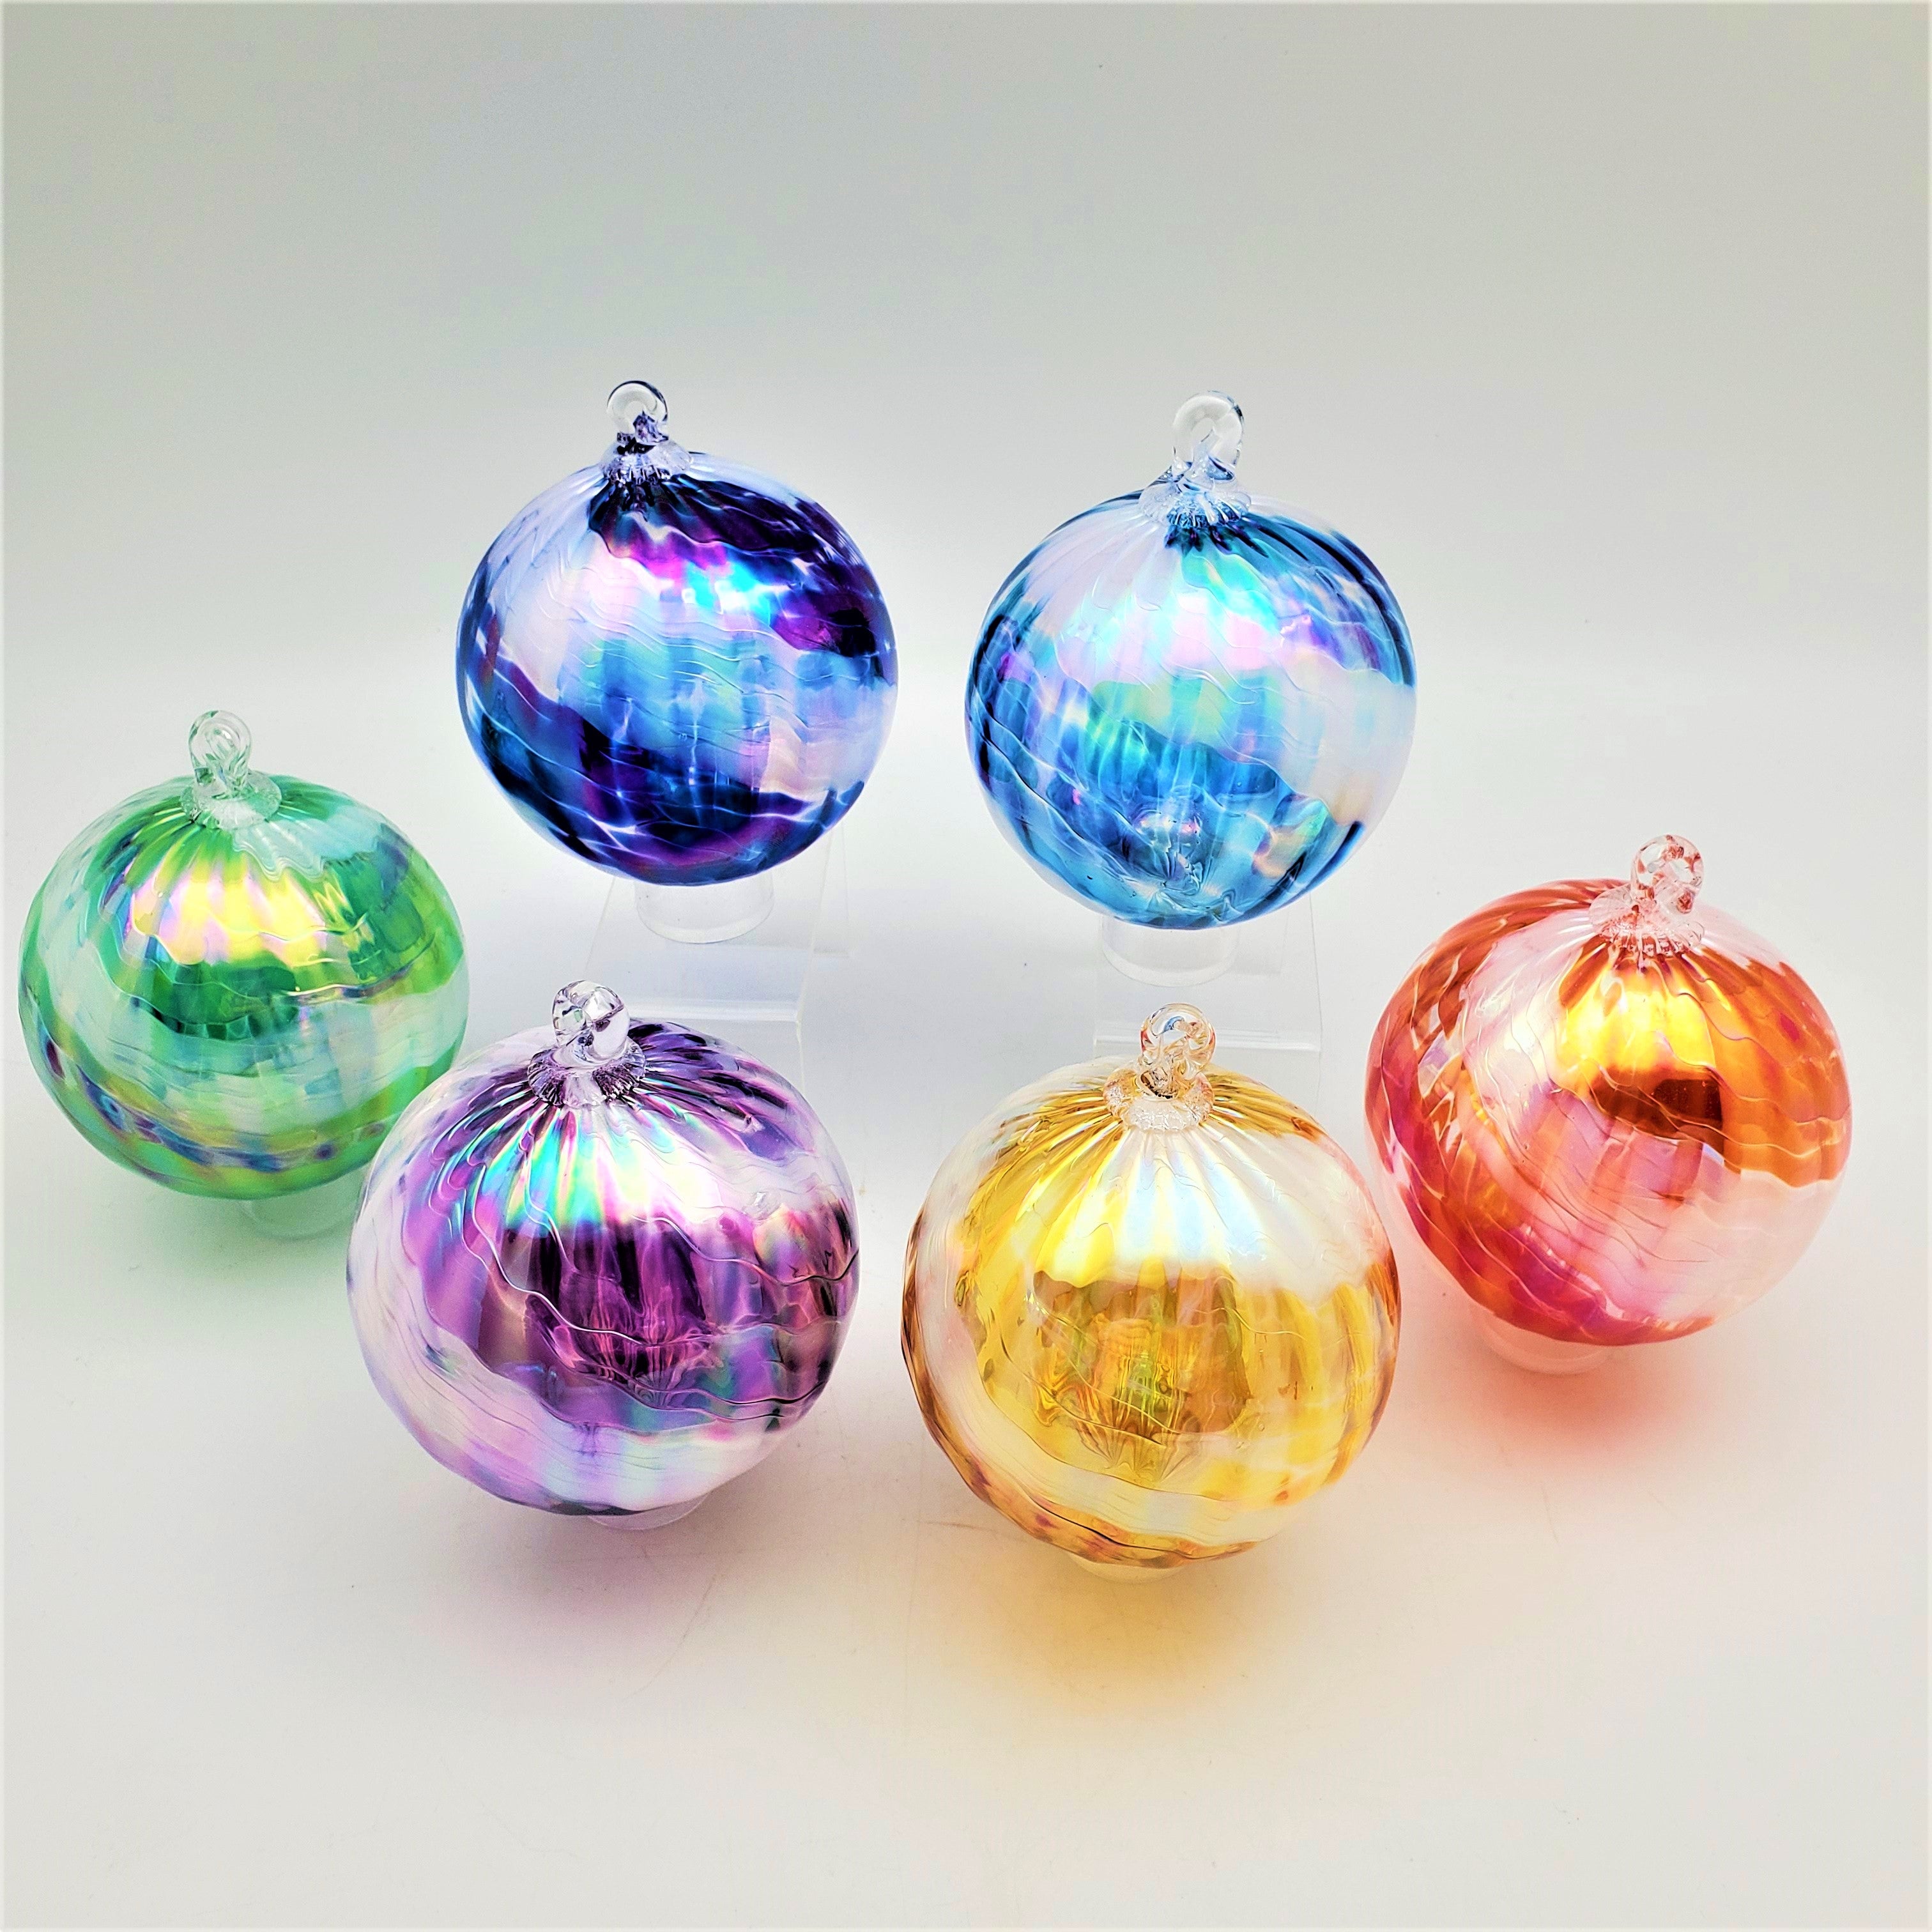 Striped Ornament - Large